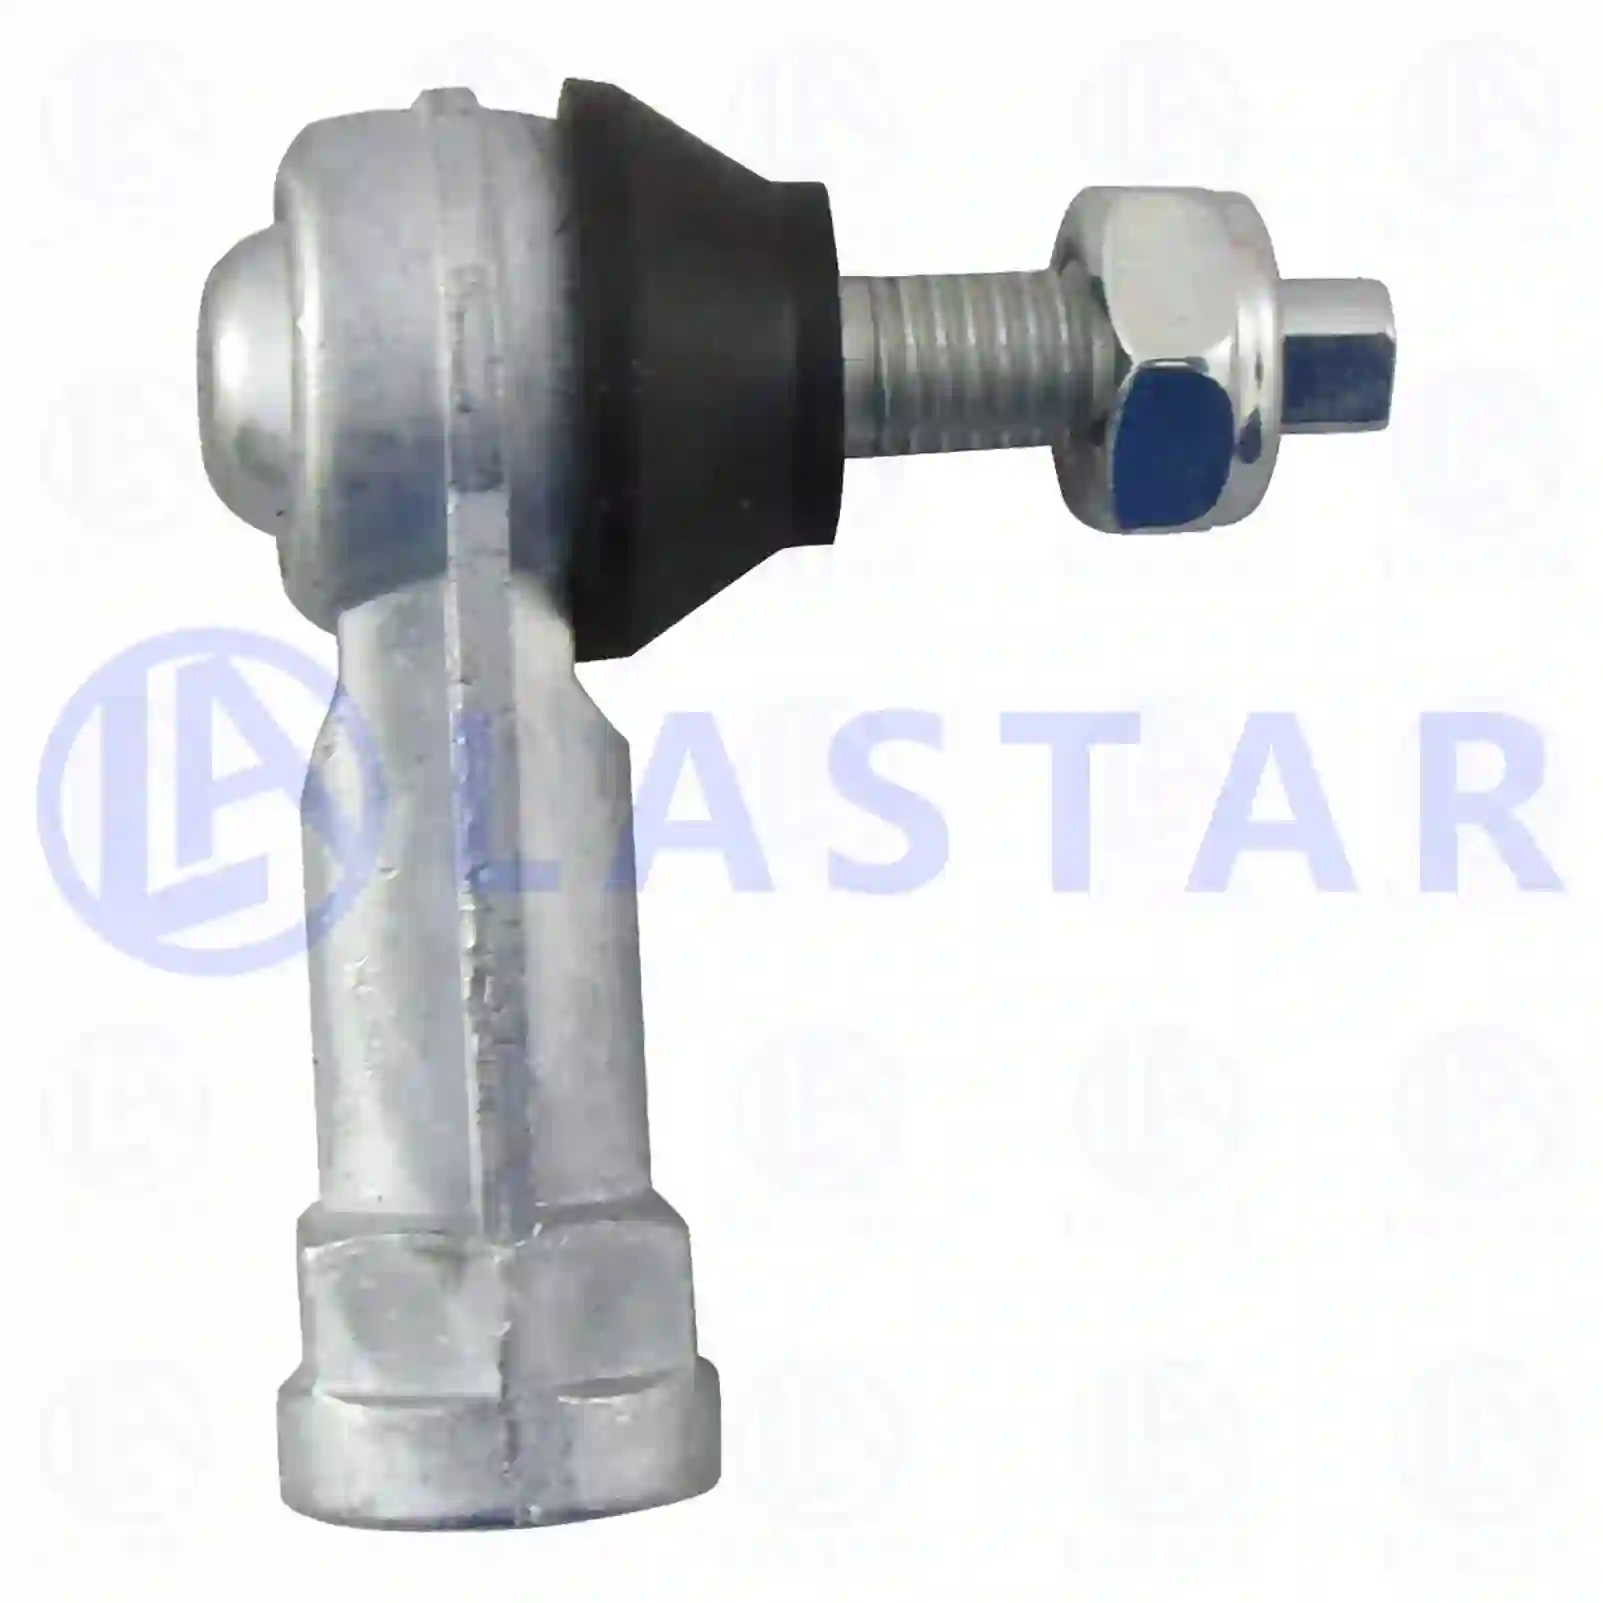 Ball joint, left hand thread, 77731295, 41002119, 41203864, 41288049, 42041328, 42079850, 42079852, ZG40137-0008 ||  77731295 Lastar Spare Part | Truck Spare Parts, Auotomotive Spare Parts Ball joint, left hand thread, 77731295, 41002119, 41203864, 41288049, 42041328, 42079850, 42079852, ZG40137-0008 ||  77731295 Lastar Spare Part | Truck Spare Parts, Auotomotive Spare Parts